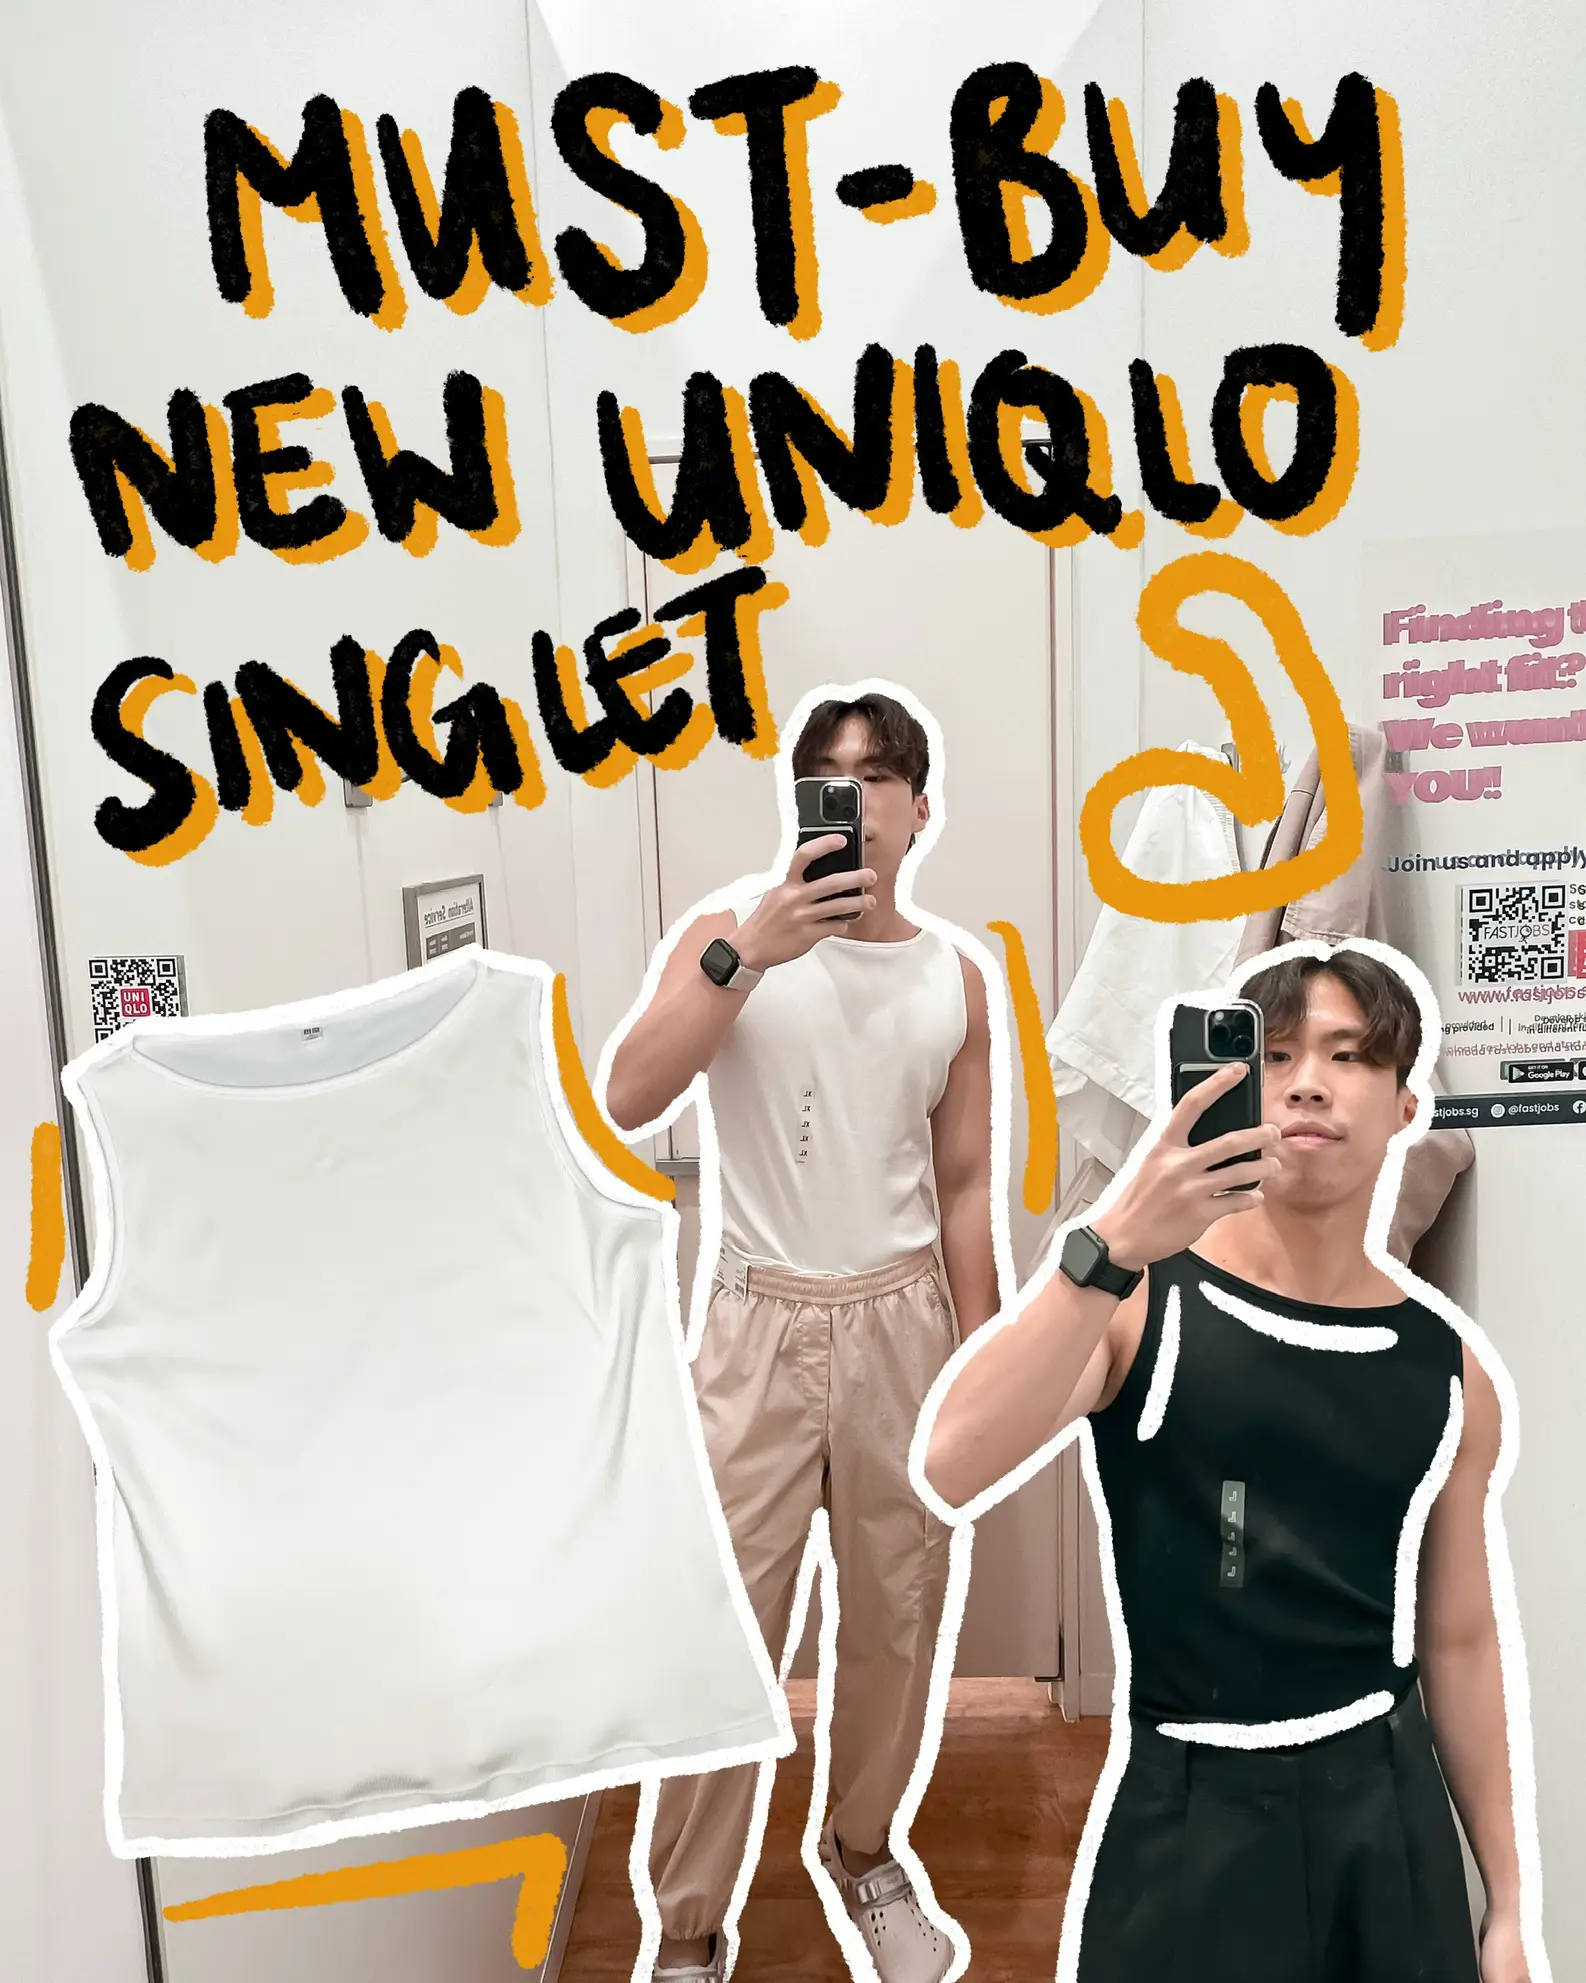 UNIQLO’s new singlet that makes you look SWOLE 💪🏻🦺's images(0)